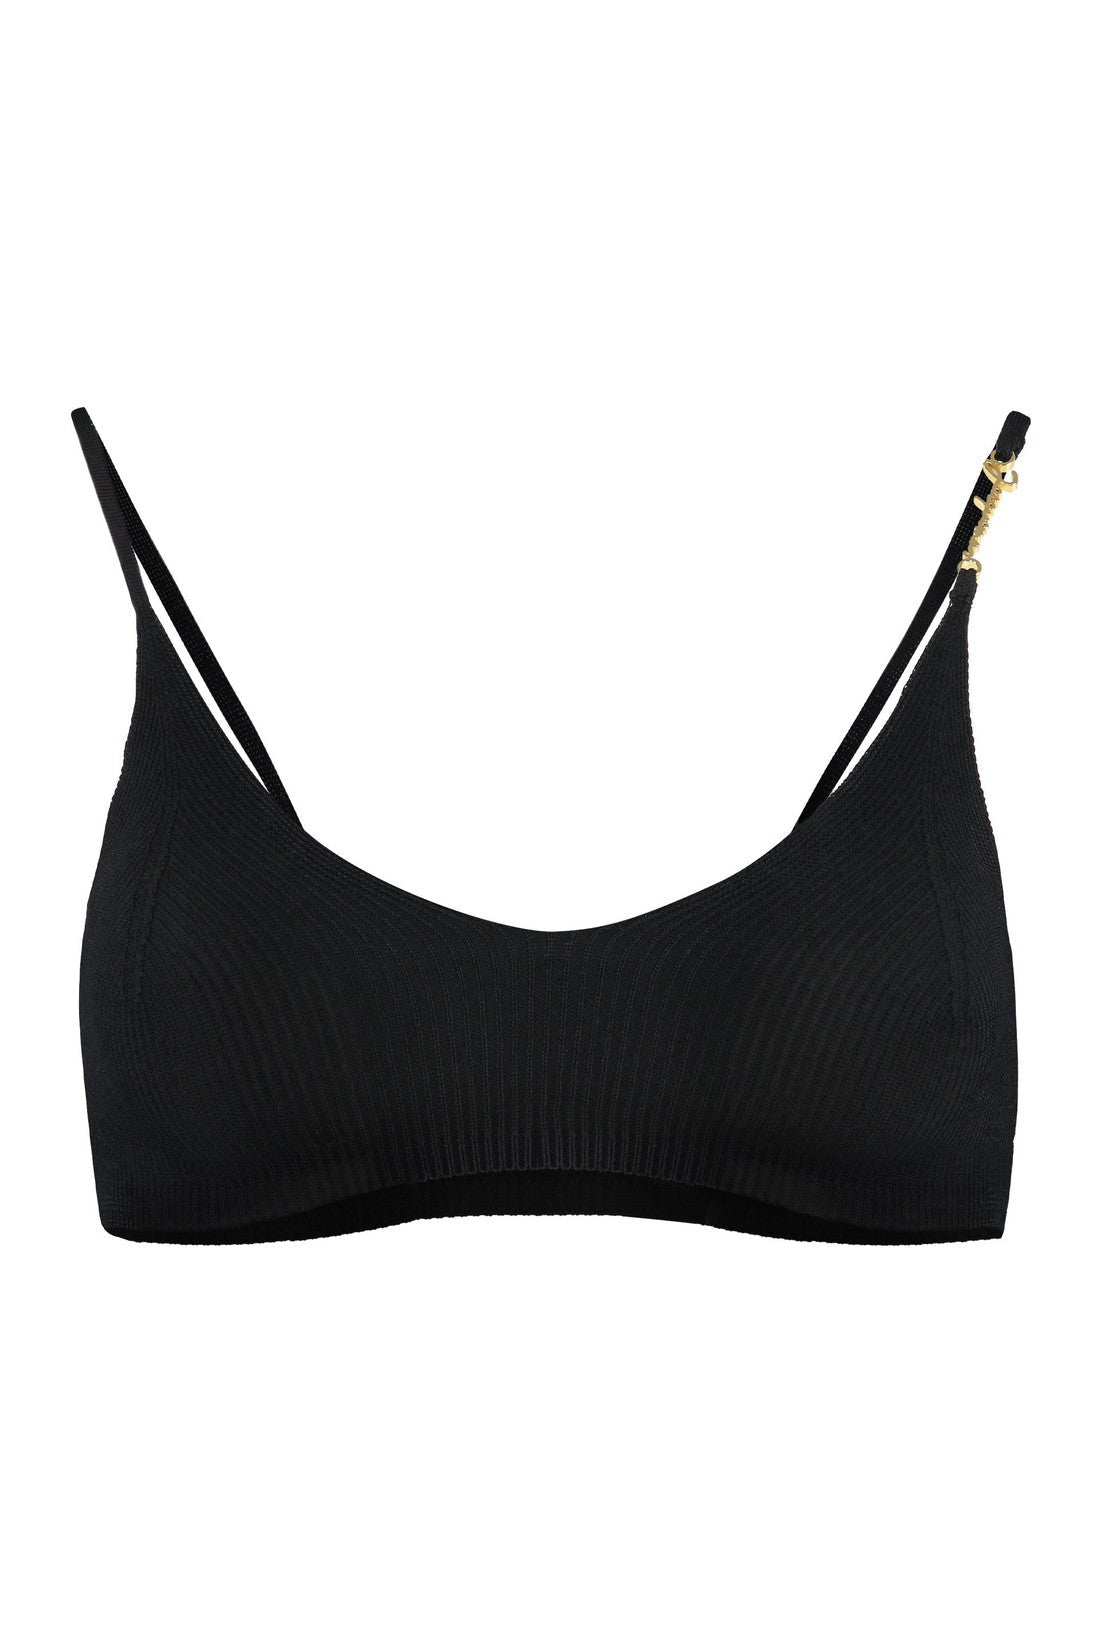 Jacquemus-OUTLET-SALE-Pralu knitted crop top-ARCHIVIST